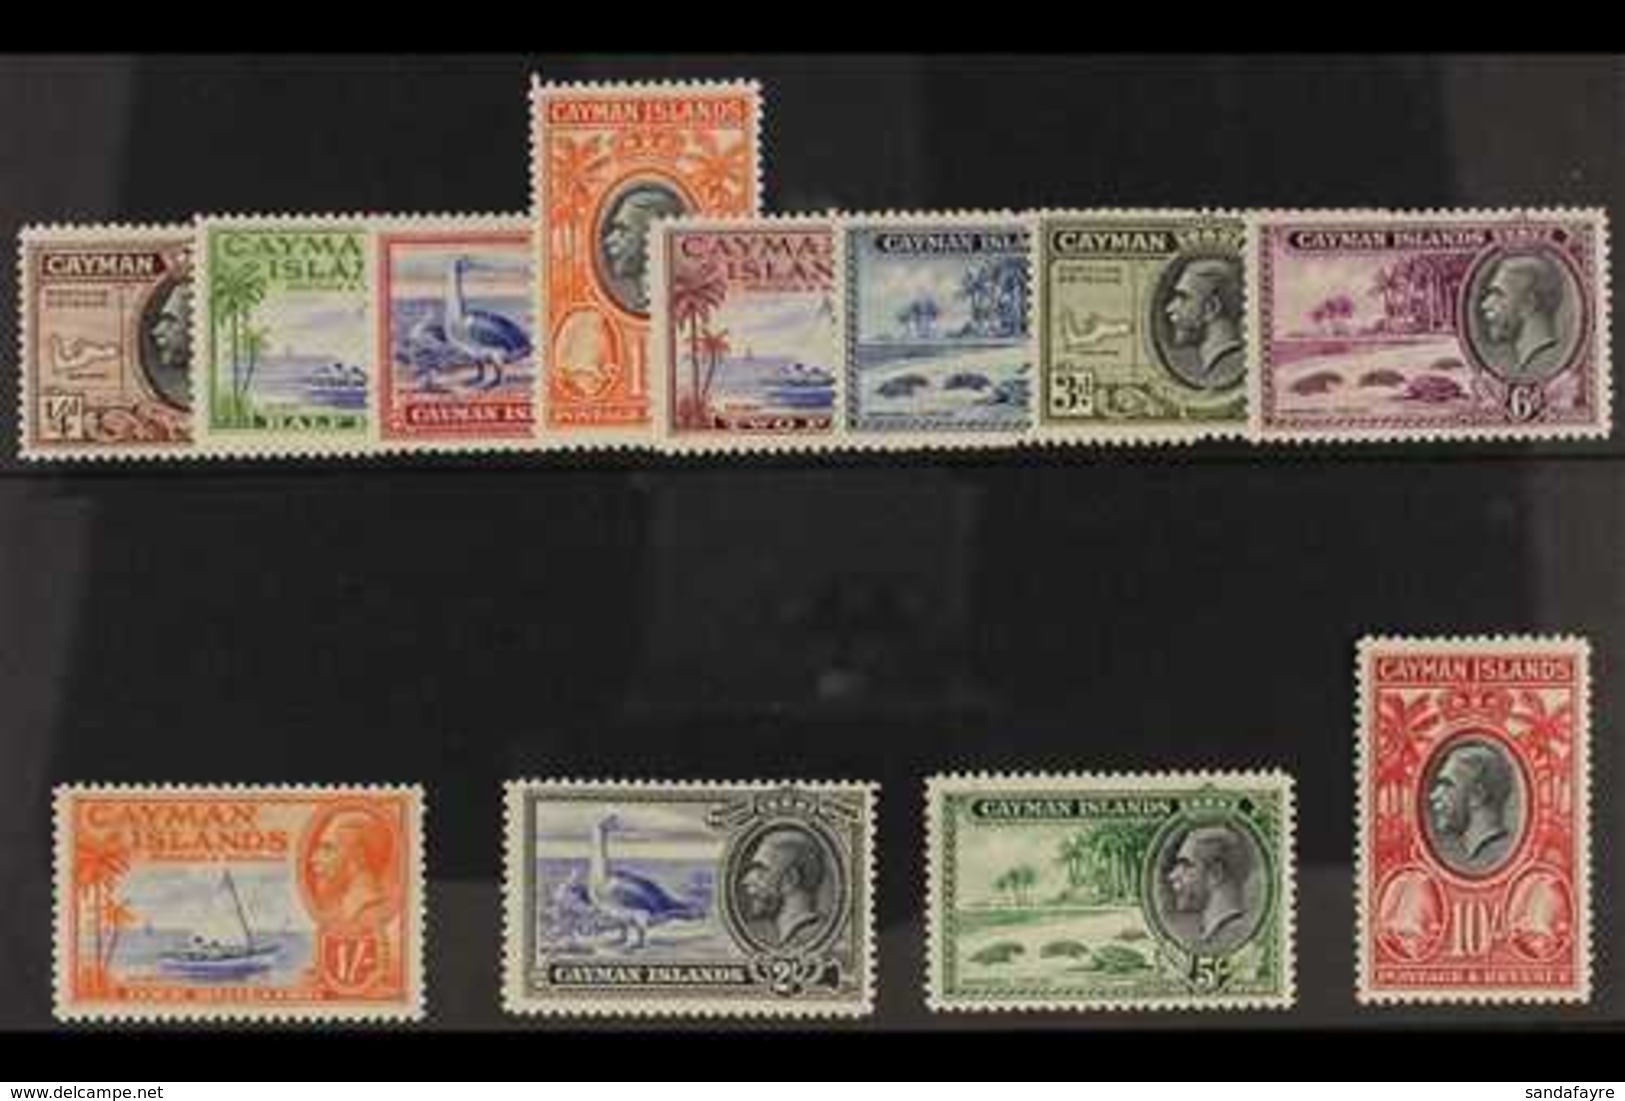 1935 KGV Pictorial Definitives Complete Set, SG 96/107, Very Fine Mint. Fresh And Attractive. (12 Stamps) For More Image - Cayman (Isole)